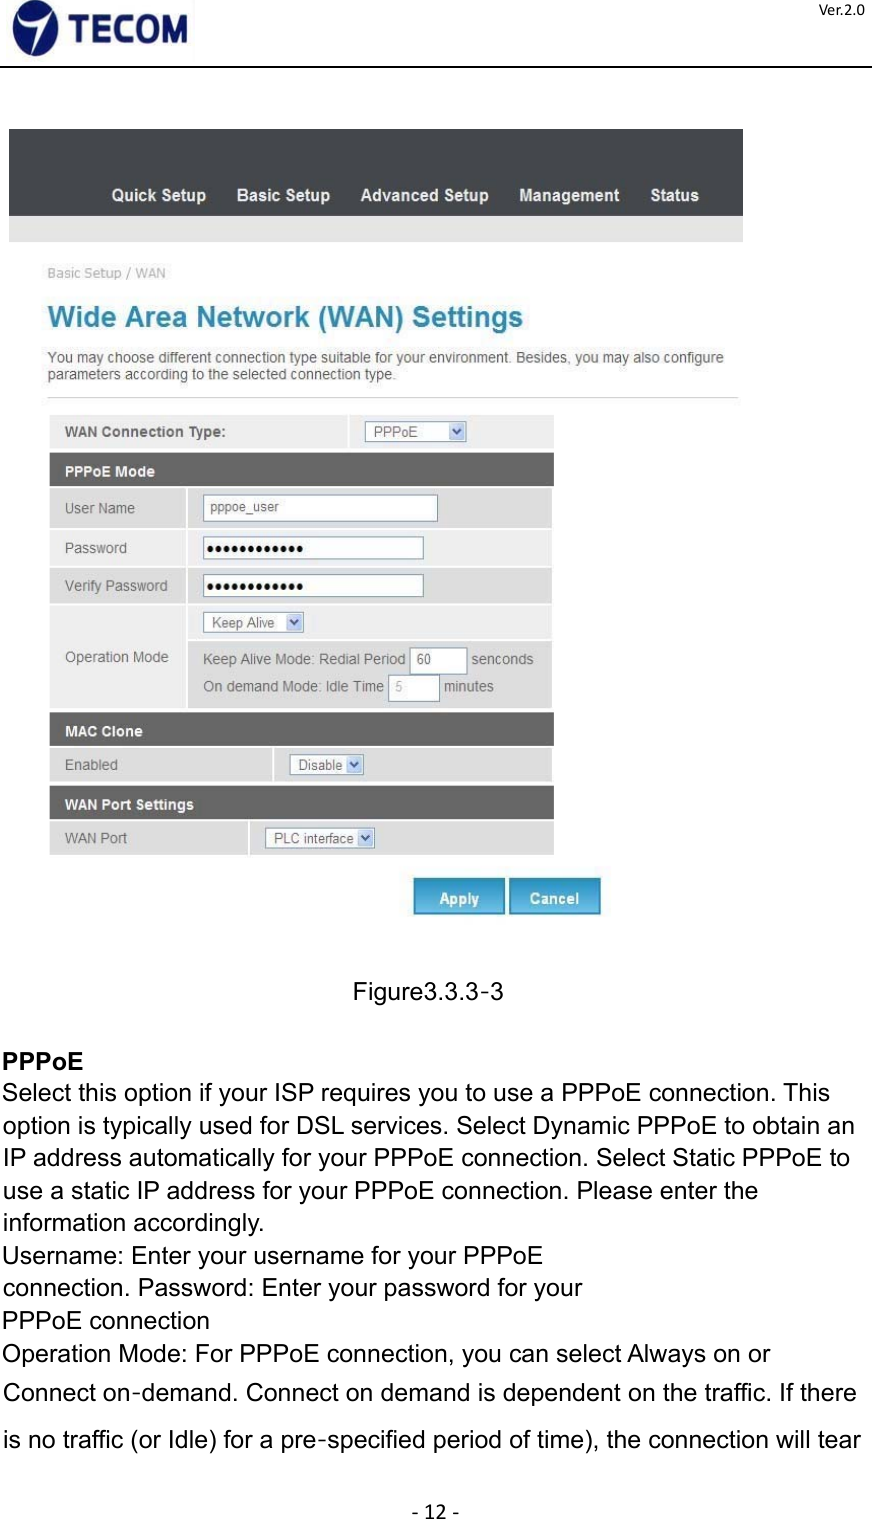  ‐12‐Ver.2.0      Figure3.3.3‐3    PPPoE  Select this option if your ISP requires you to use a PPPoE connection. This option is typically used for DSL services. Select Dynamic PPPoE to obtain an IP address automatically for your PPPoE connection. Select Static PPPoE to use a static IP address for your PPPoE connection. Please enter the information accordingly.  Username: Enter your username for your PPPoE connection. Password: Enter your password for your  PPPoE connection  Operation Mode: For PPPoE connection, you can select Always on or Connect on‐demand. Connect on demand is dependent on the traffic. If there is no traffic (or Idle) for a pre‐specified period of time), the connection will tear 